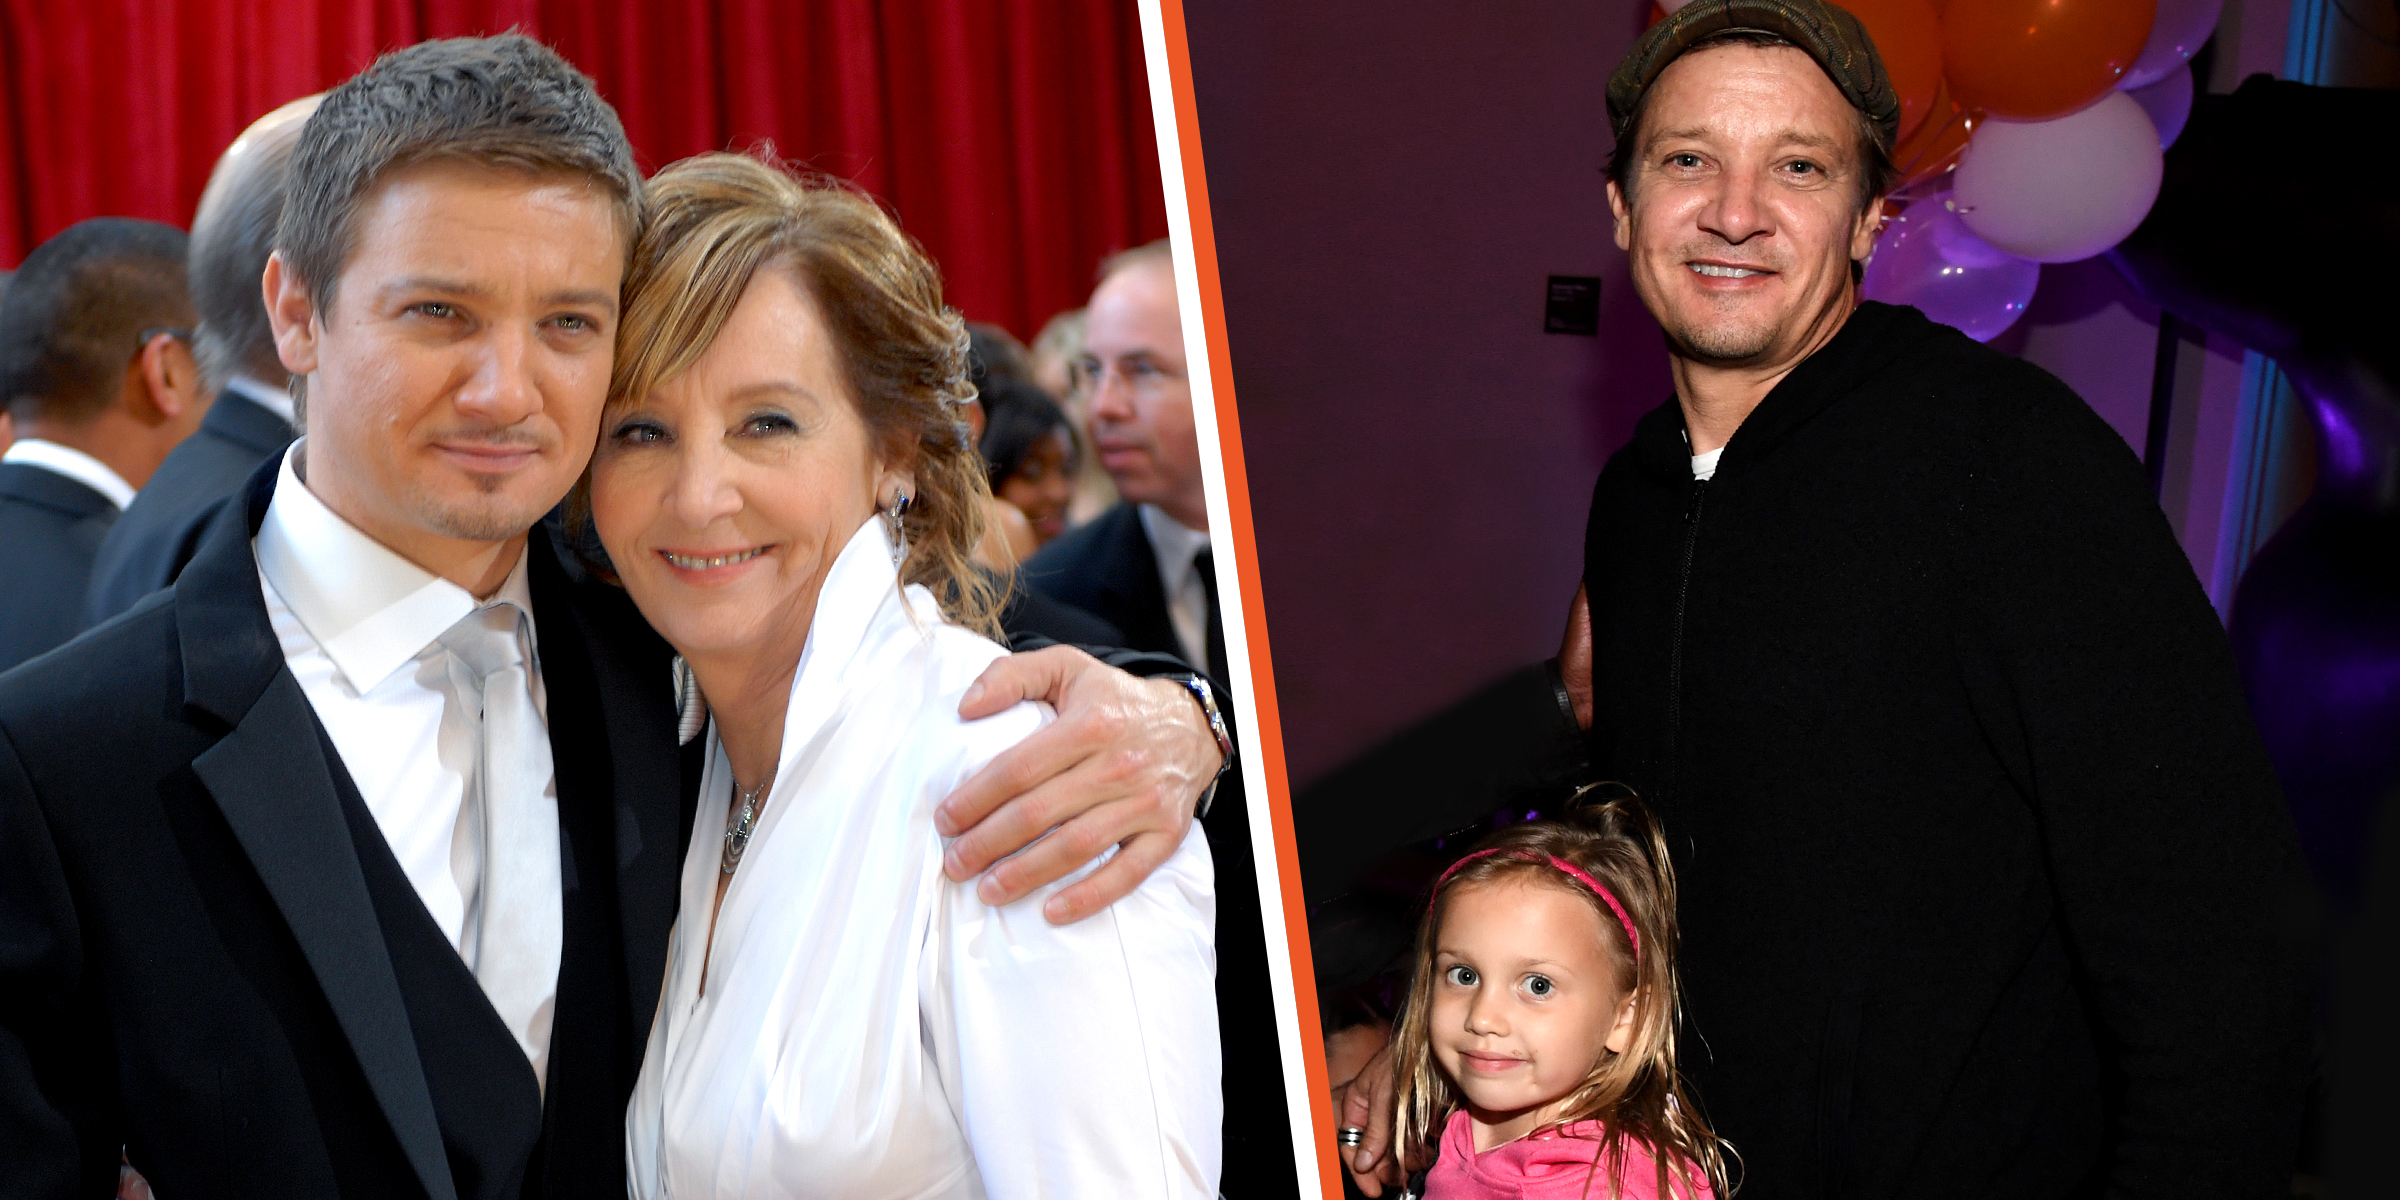 Jeremy Renner and his mom, Valerie Renner, at the 2010 Academy Awards. | Ava Berlin Renner with her dad, Jeremy Renner attend a festival in November 2019. | Source Getty Images